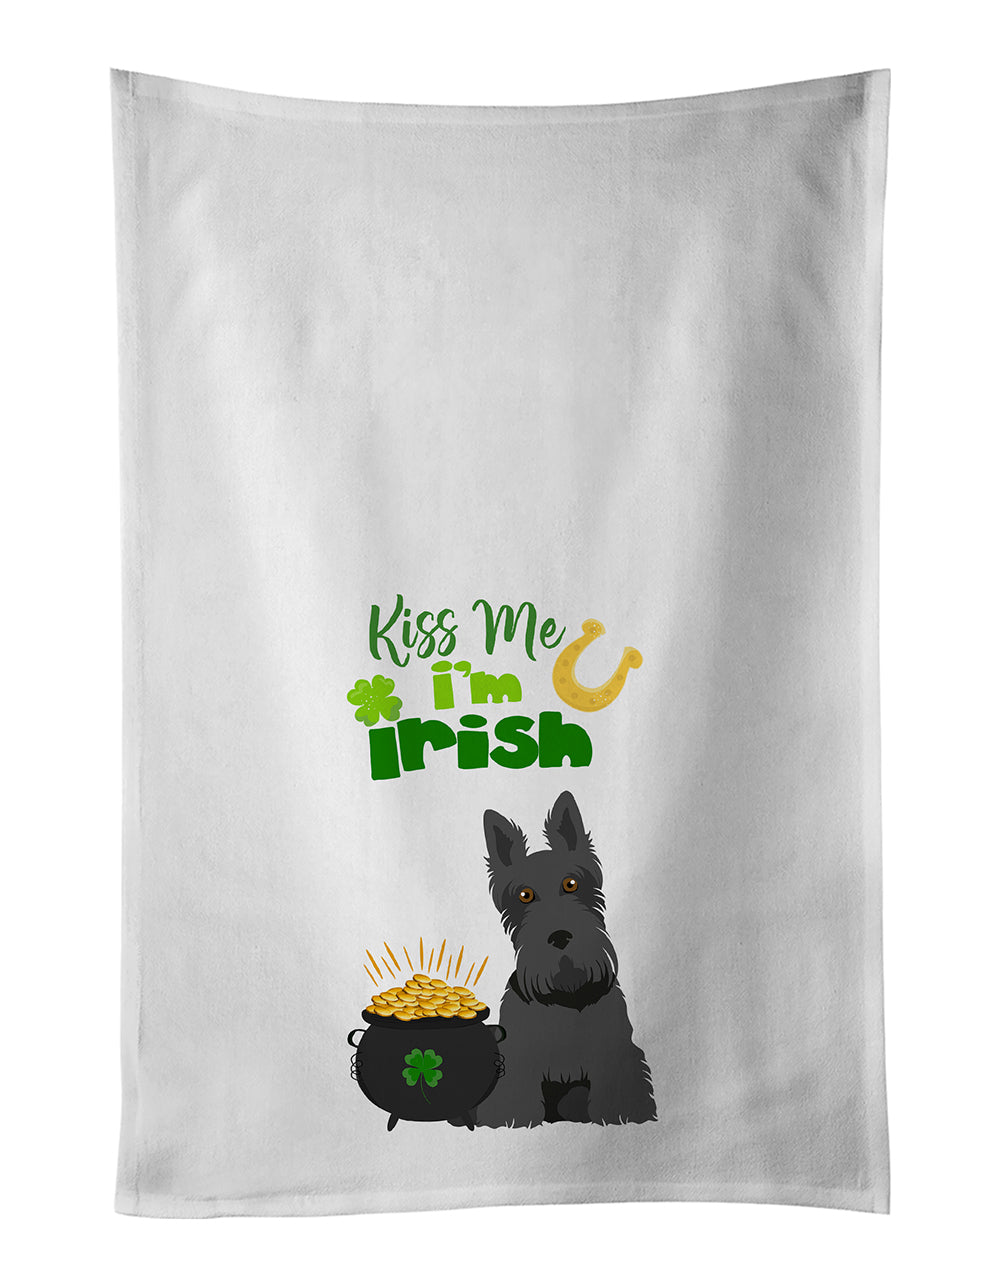 Buy this Black Scottish Terrier St. Patrick's Day White Kitchen Towel Set of 2 Dish Towels